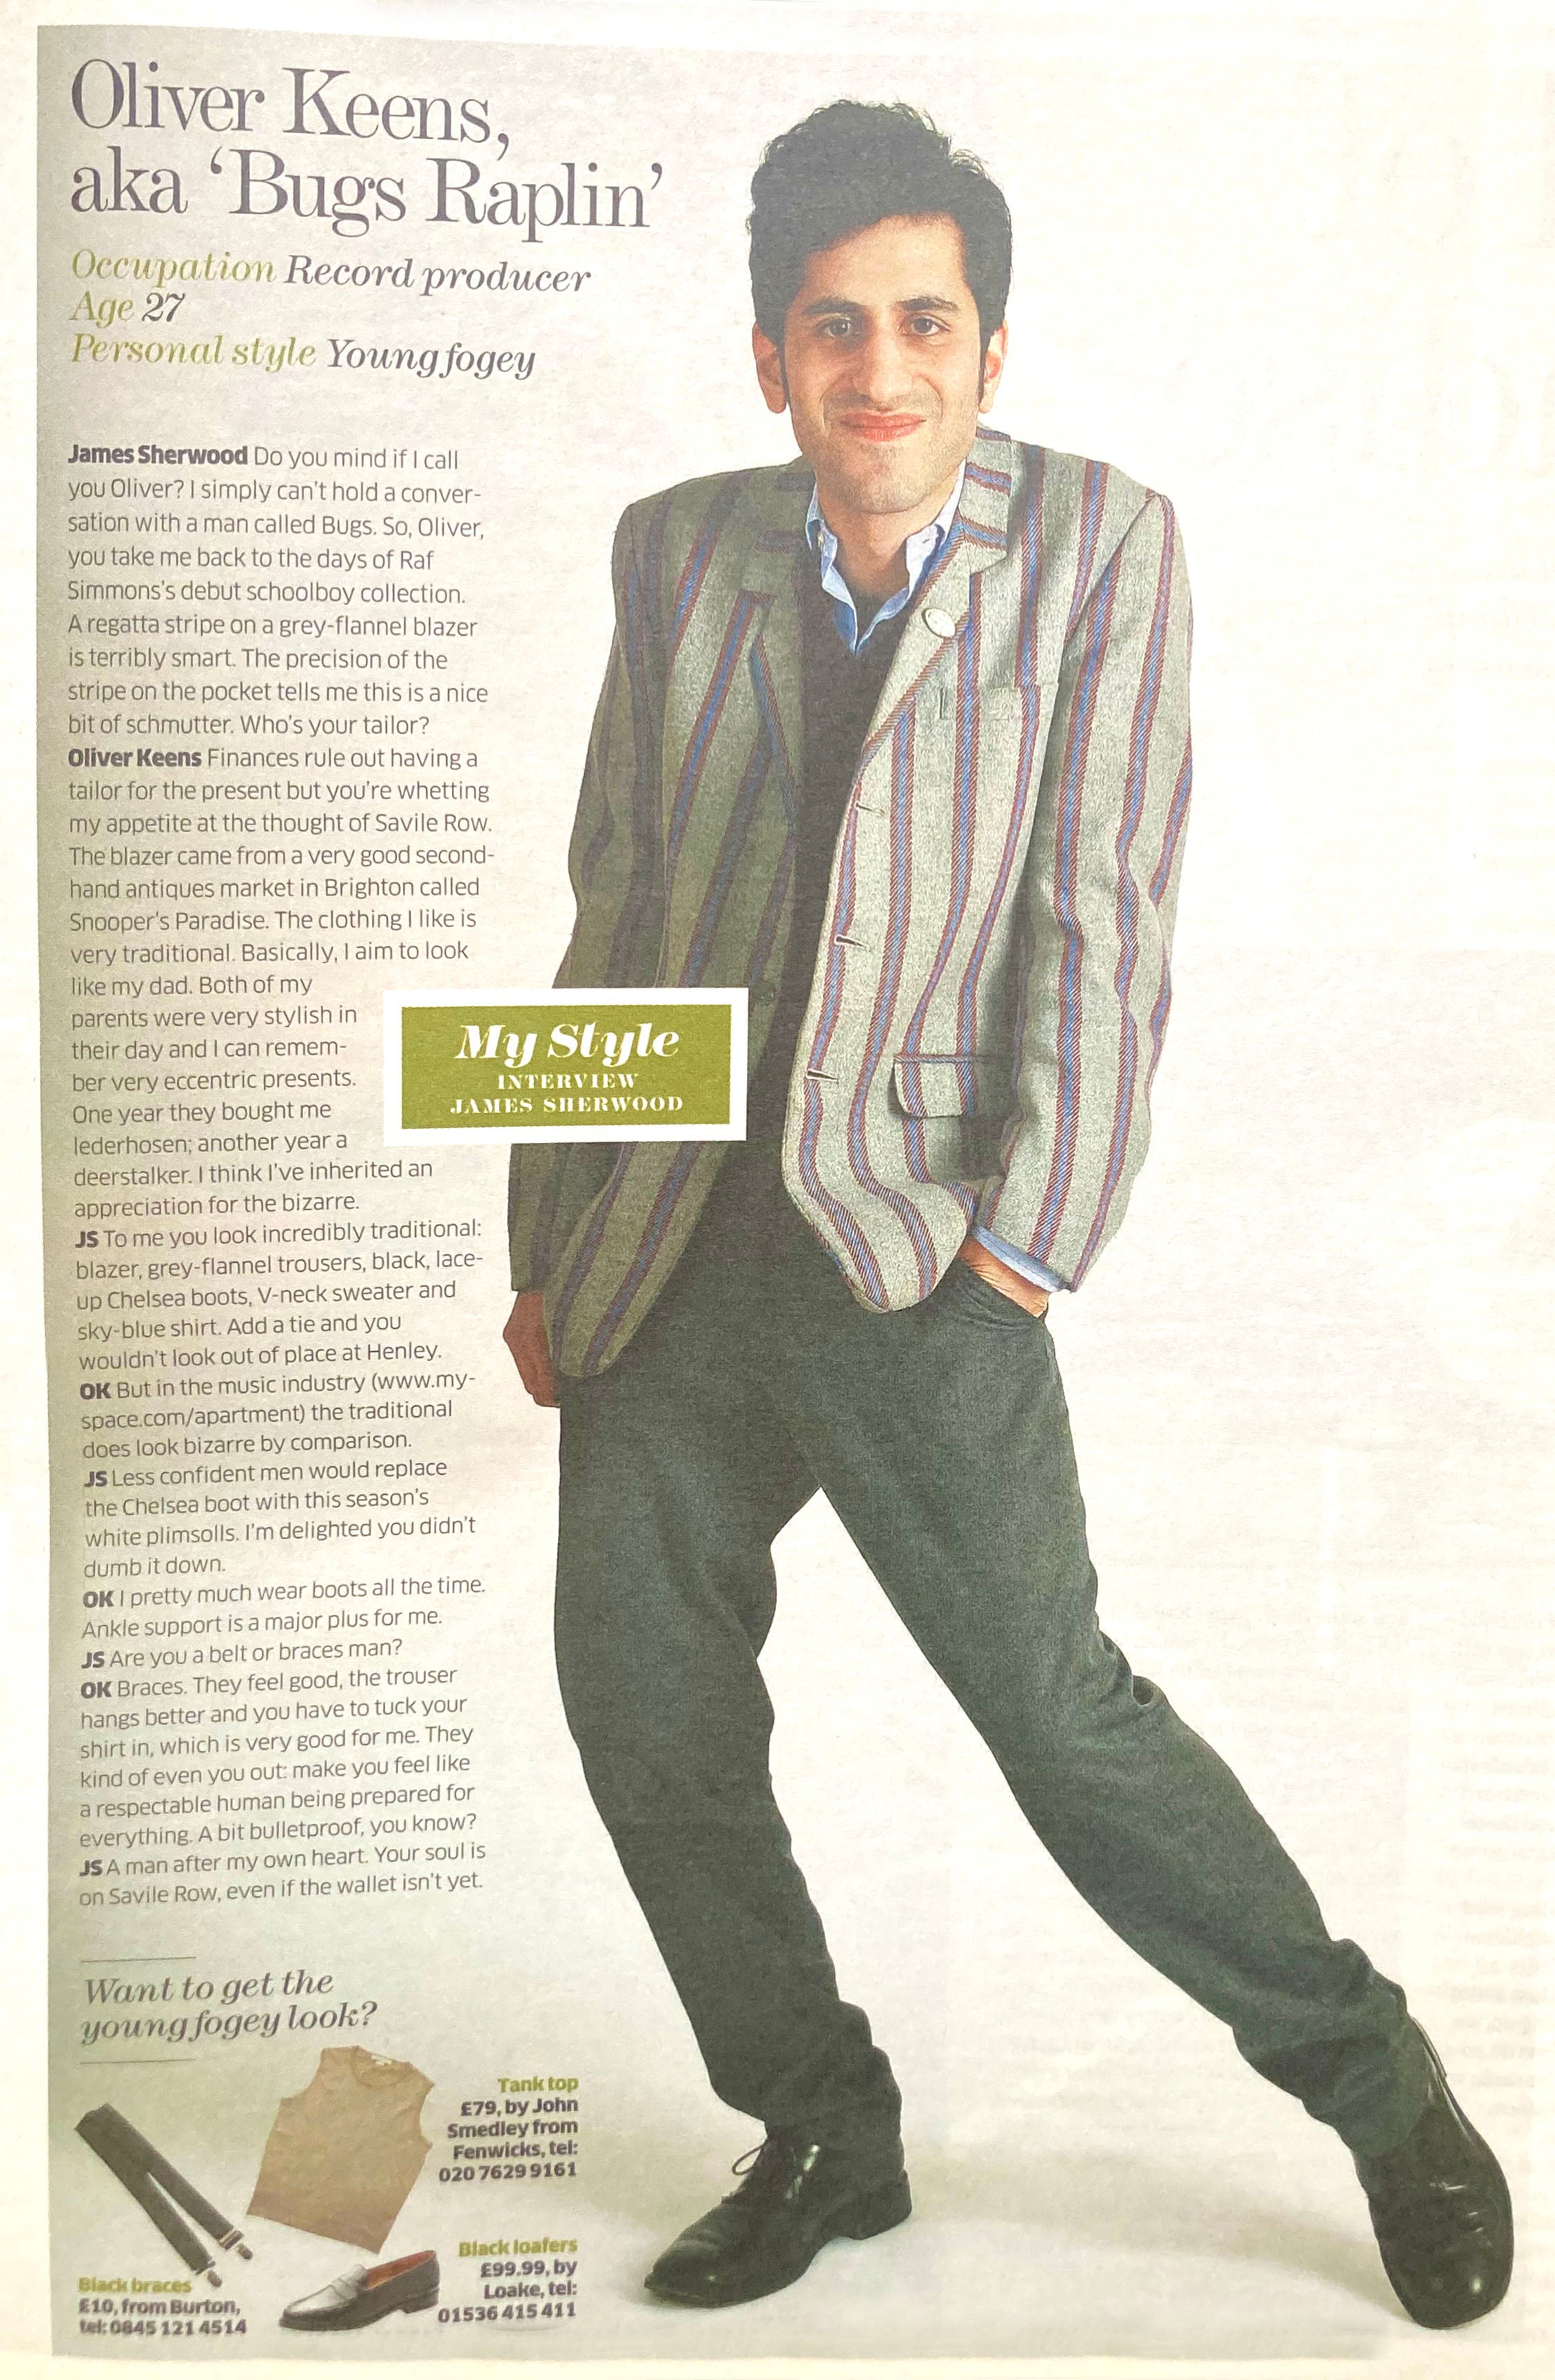 Introducing ‘The Young Fogey’: Oliver Keens in a 2007 edition of ‘The Independent’